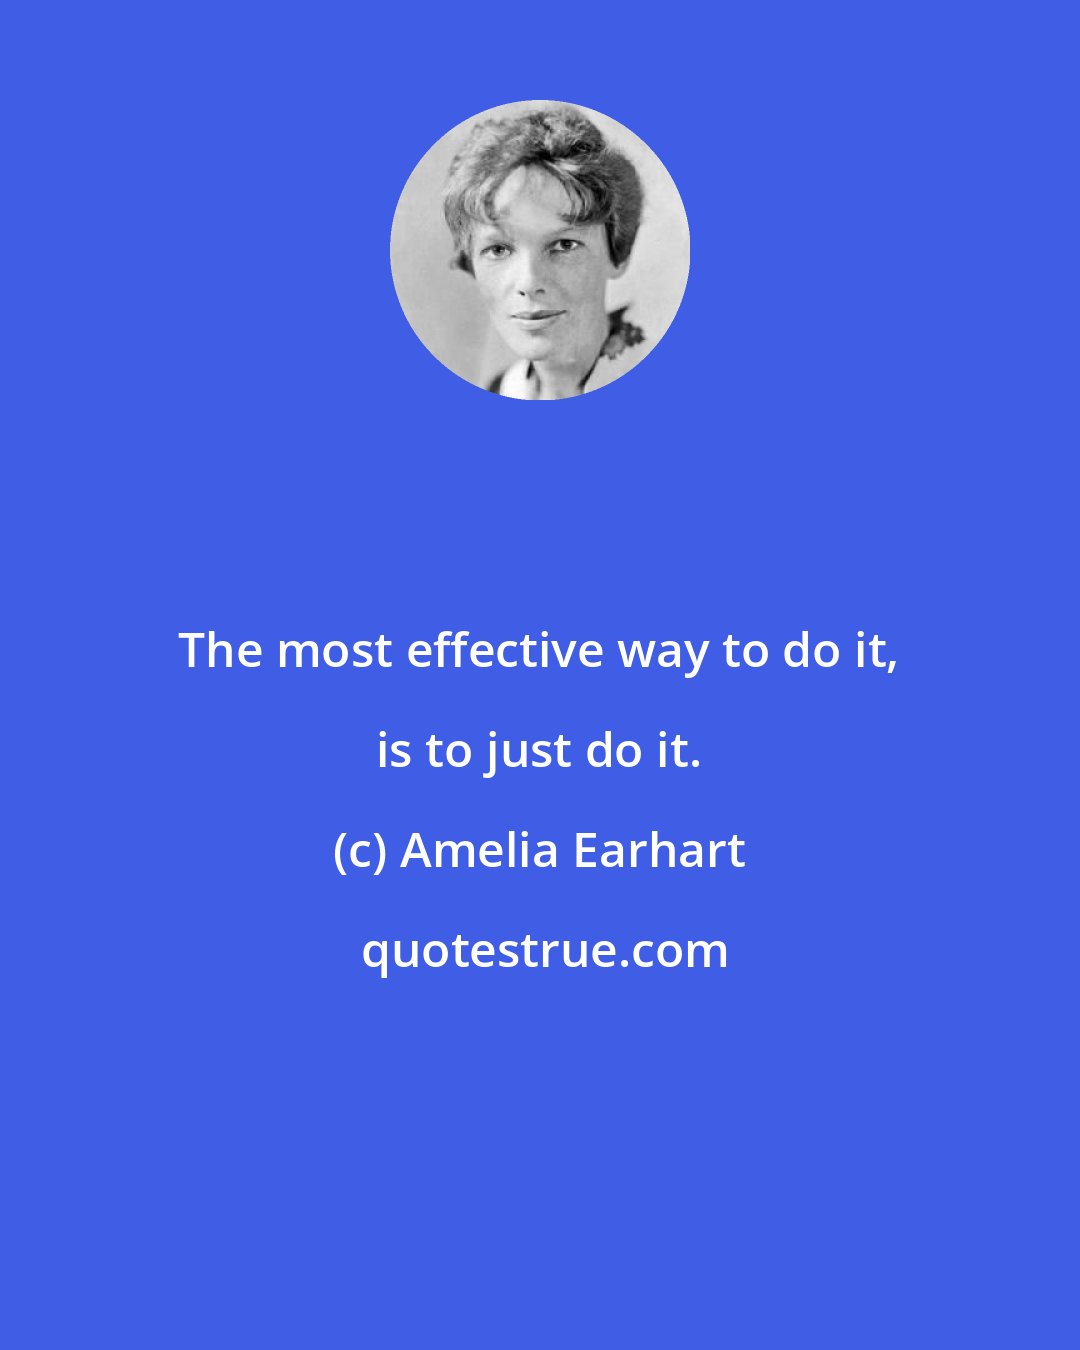 Amelia Earhart: The most effective way to do it, is to just do it.